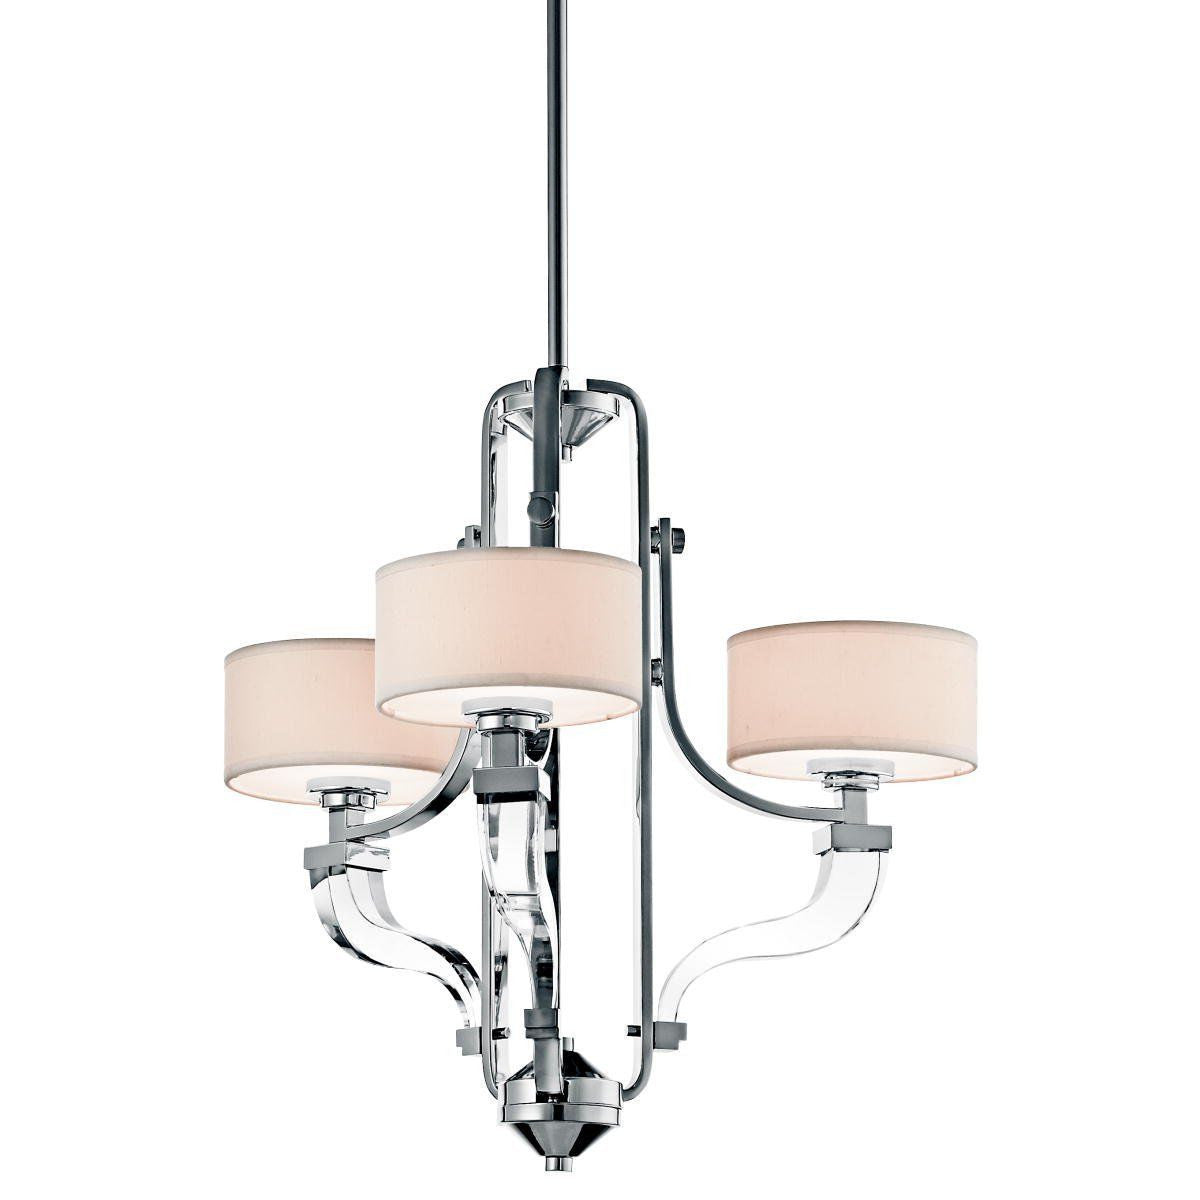 Aztec 34664 by Kichler Lighting Three Light Point Claire Hanging Chandelier in Nickel Finish